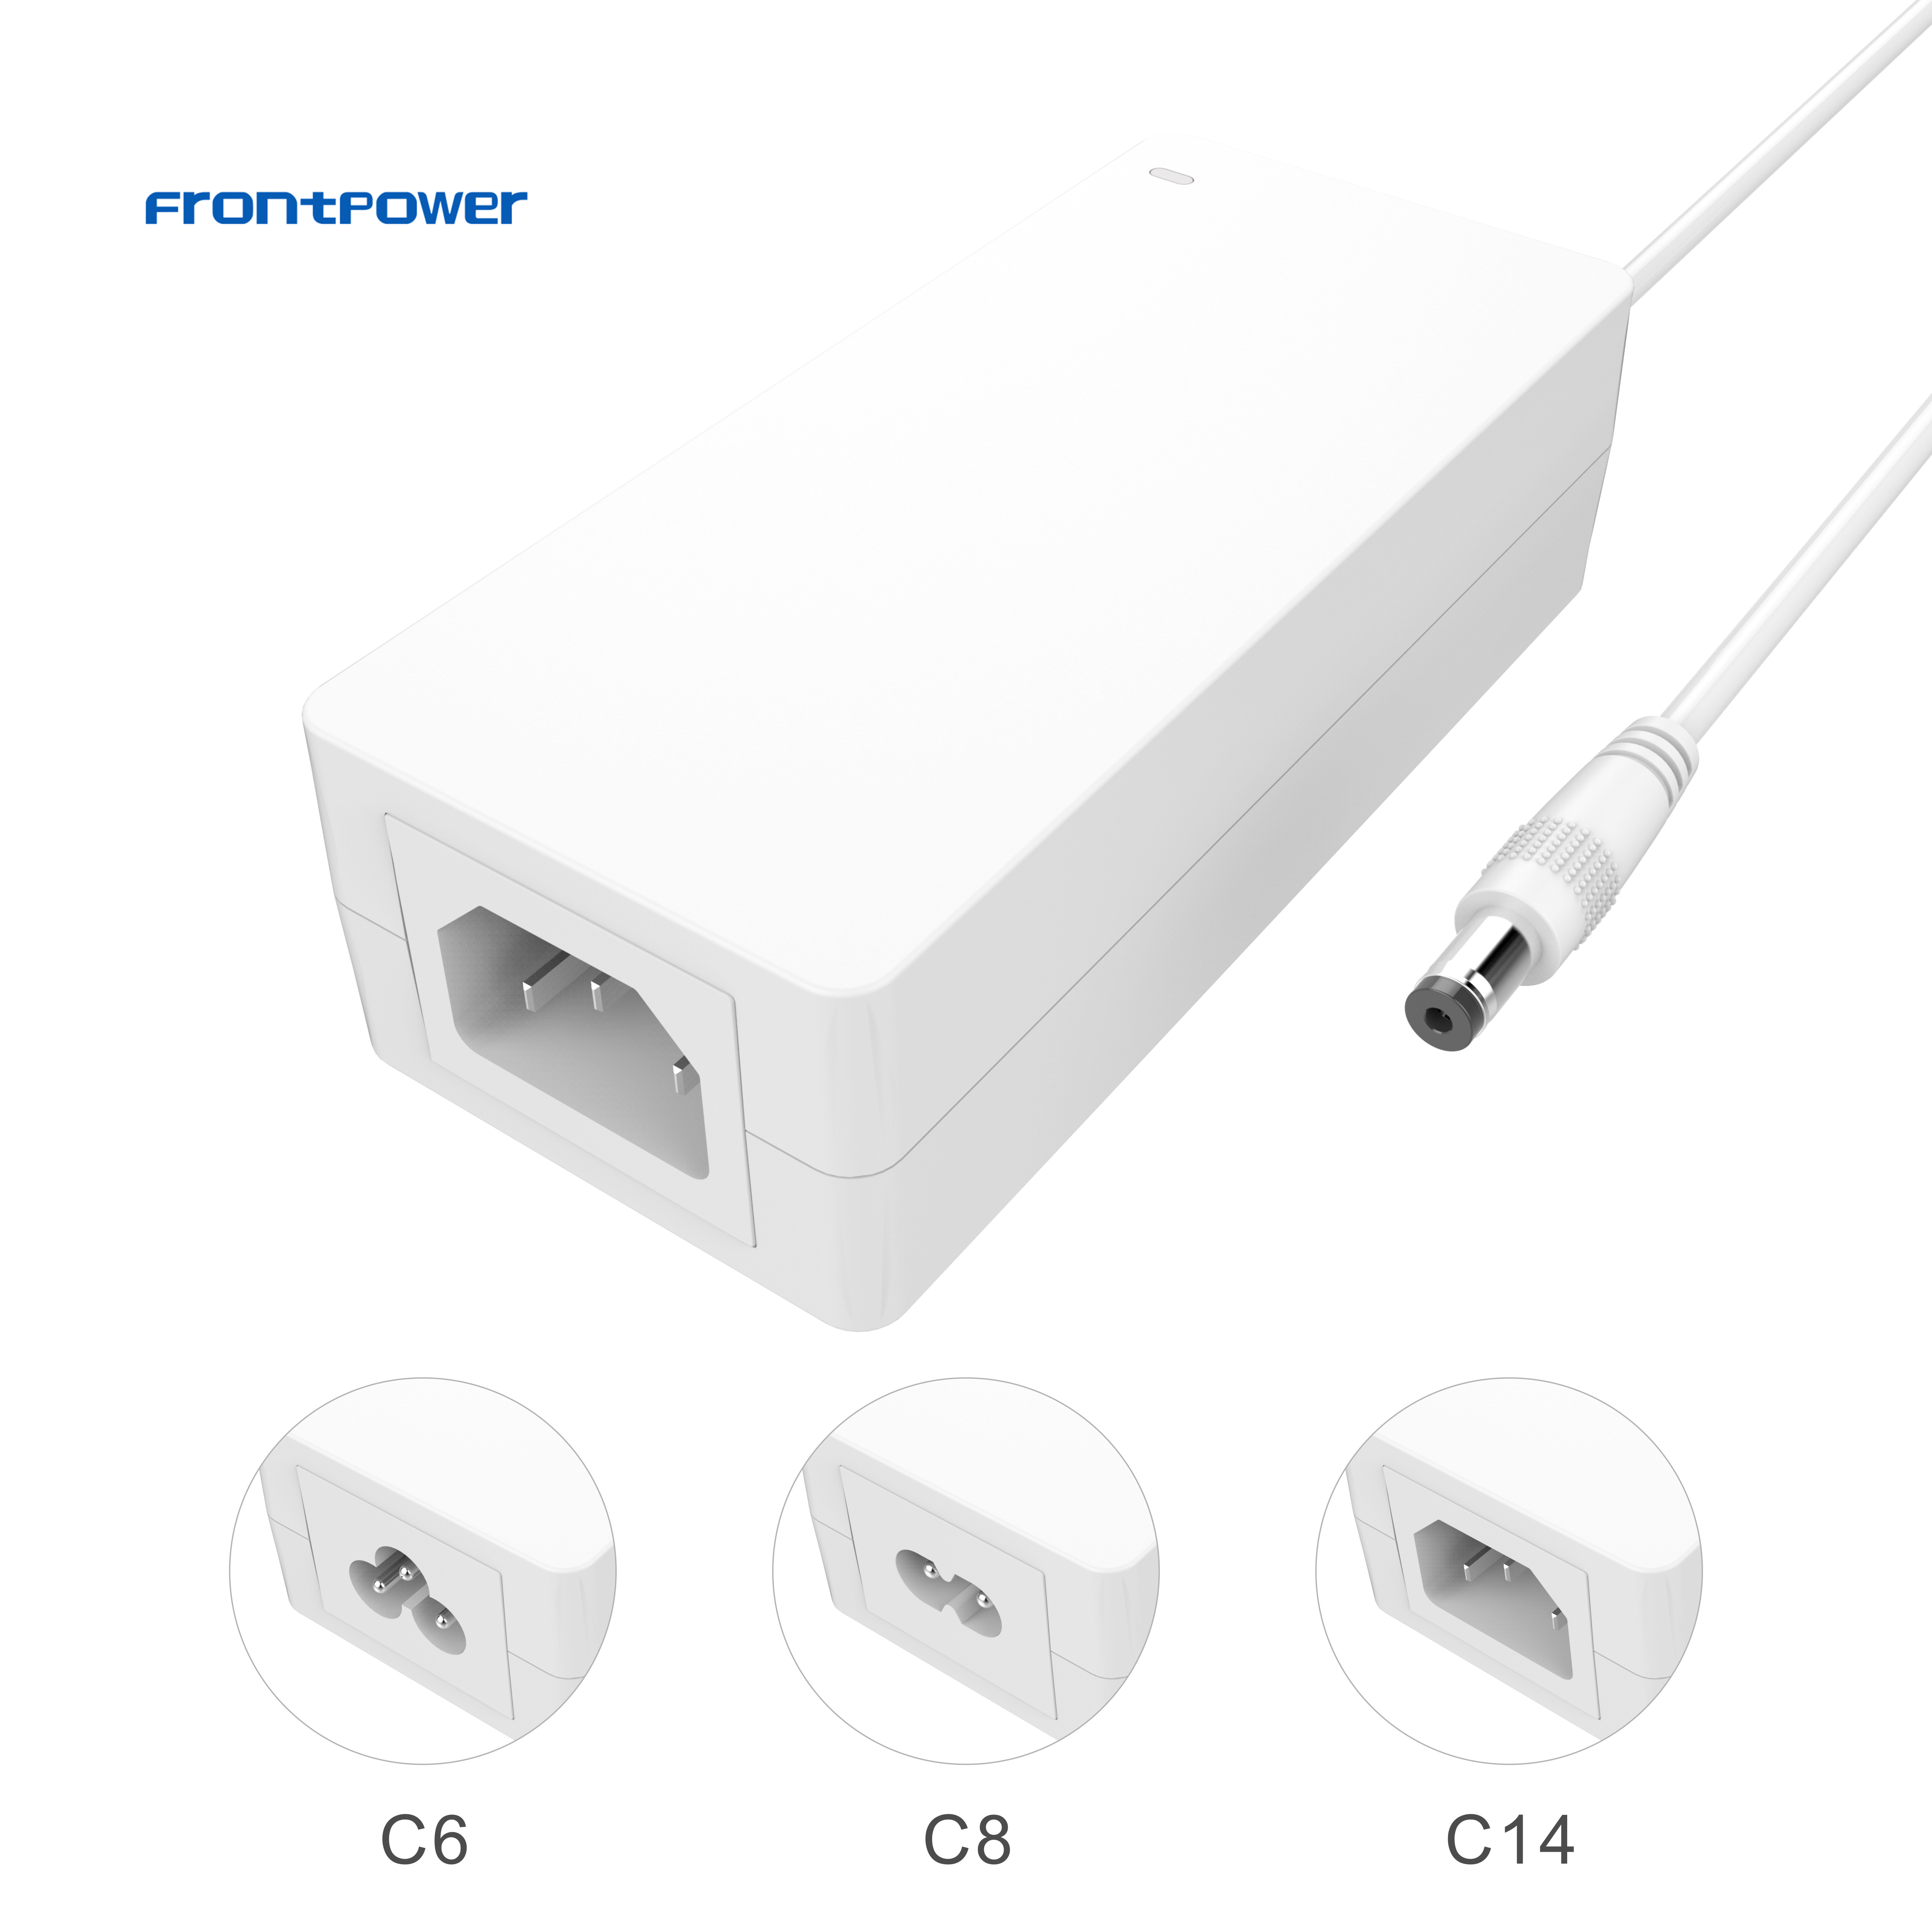 65W 12v 5a 19v 3.4a 15v 4a 24v 2.5a Desktop Power Adapter Supply ACDC Charger SMPS Switch for Laptop Macbook Humidifier Notebook